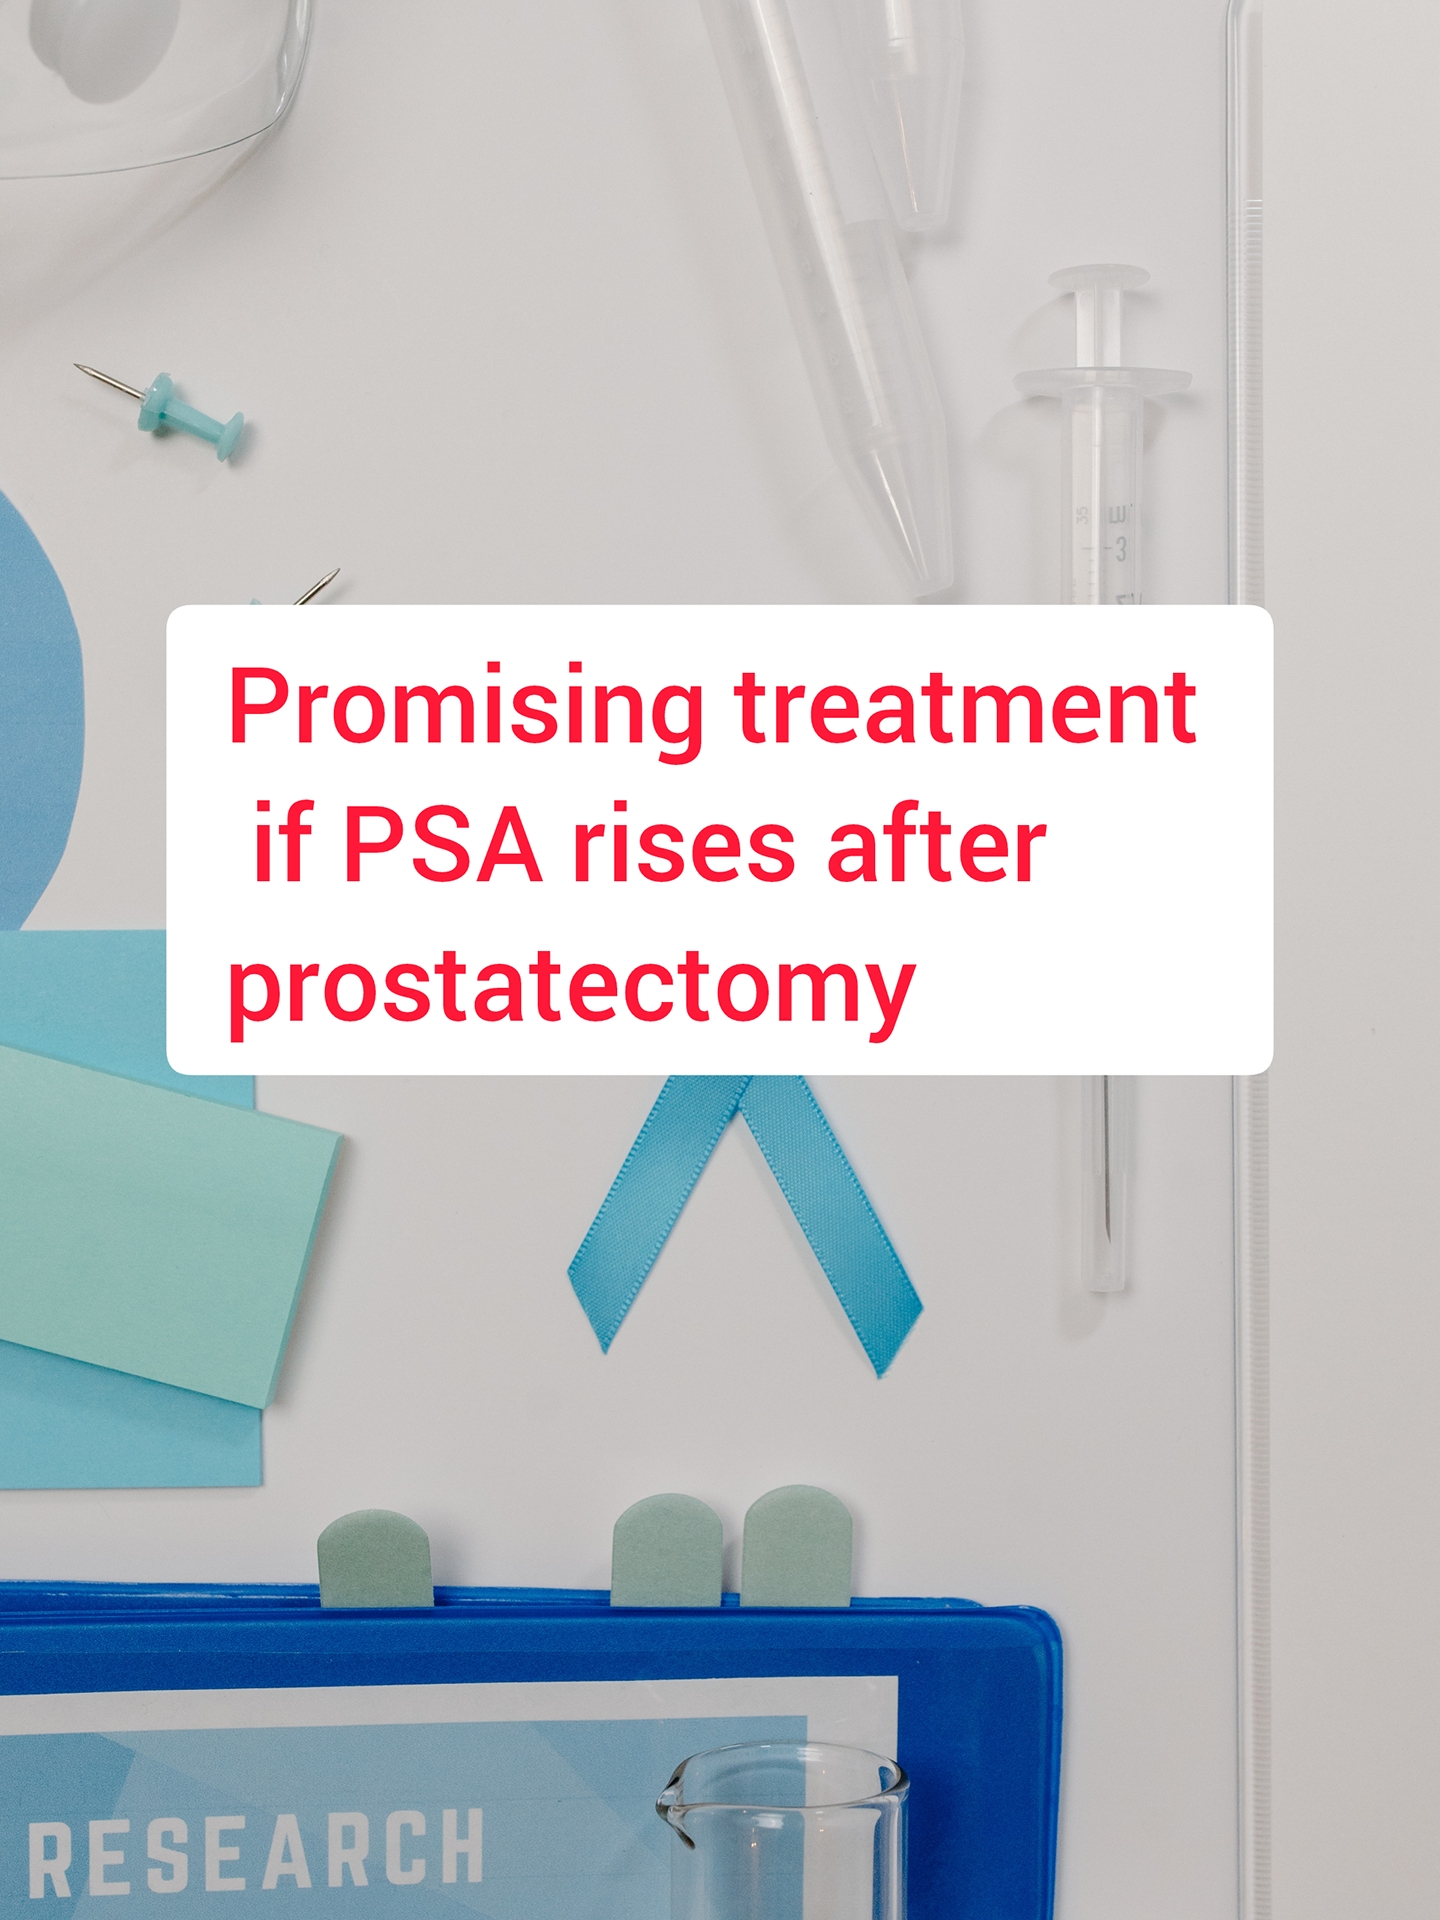 Promising treatment if PSA increases after prostatectomy